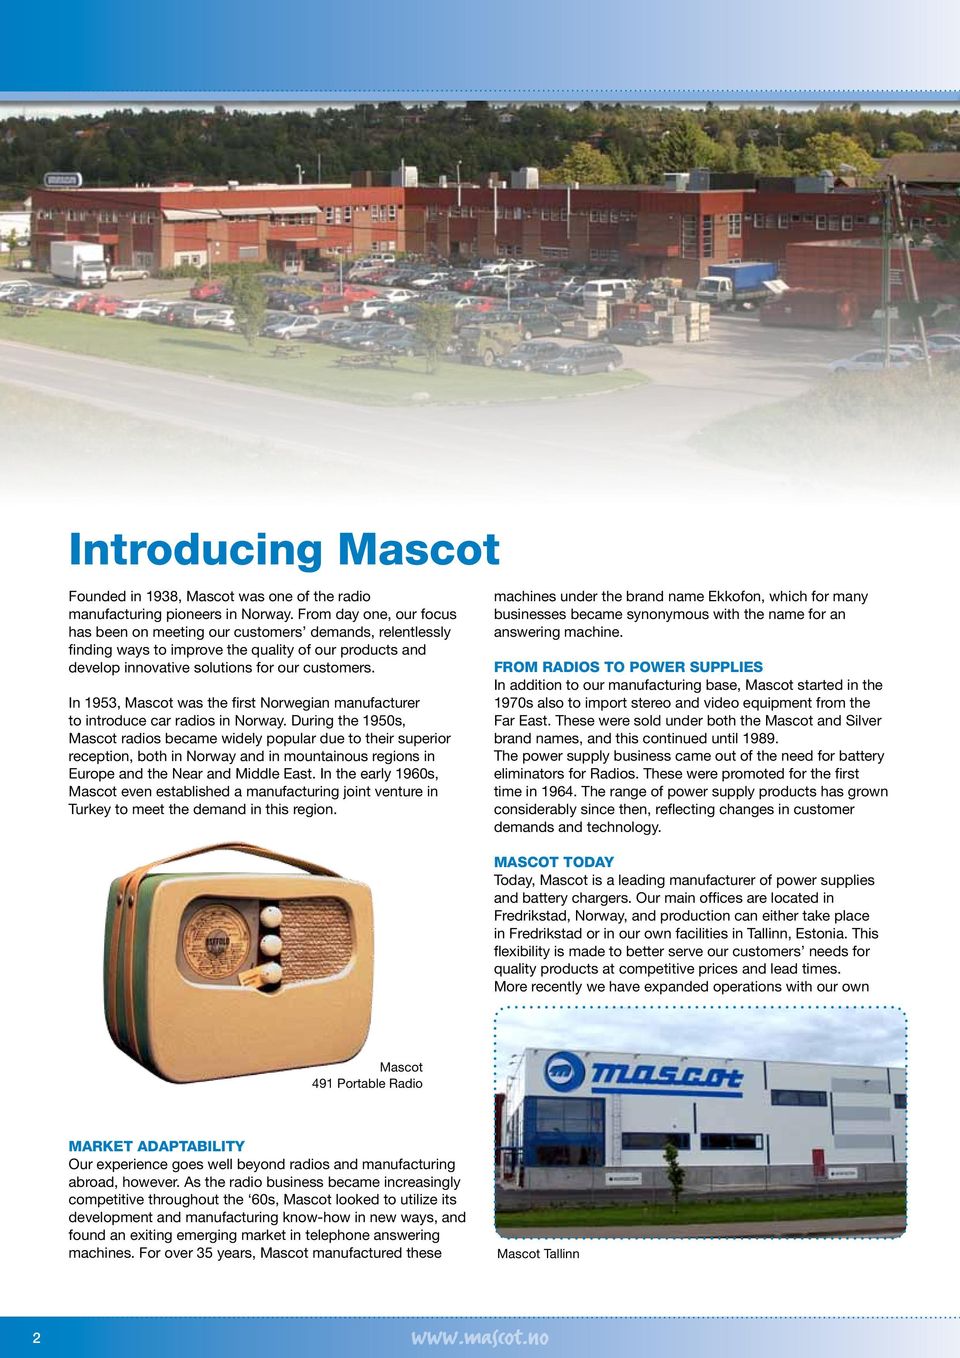 In 1953, Mascot was the first Norwegian manufacturer to introduce car radios in Norway.